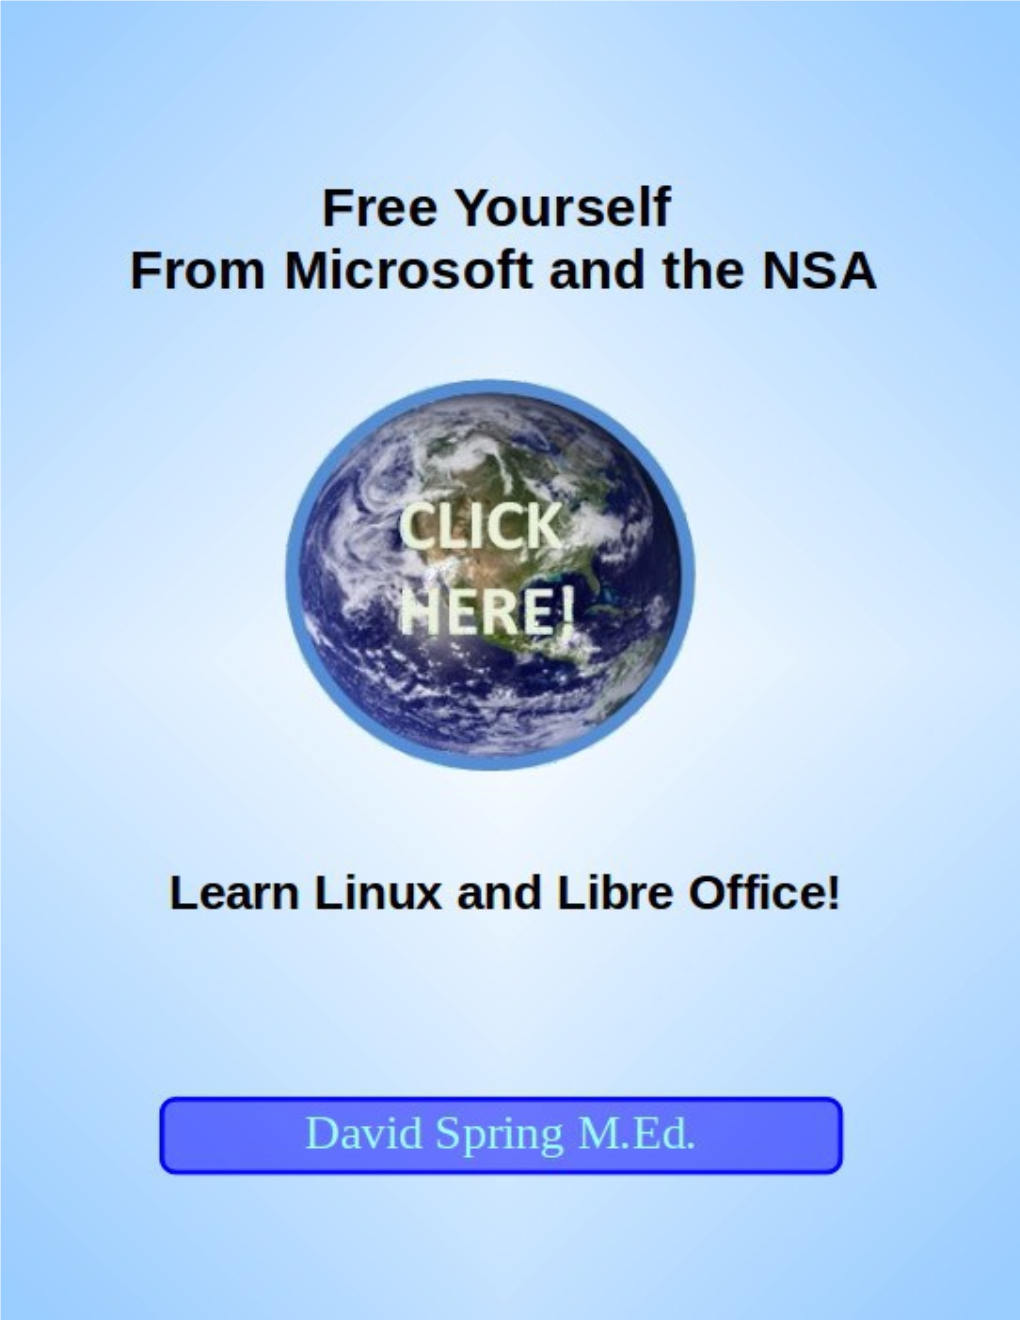 Free Yourself from Microsoft and the NSA... Learn Linux and Libre Office! Copyright, David Spring M